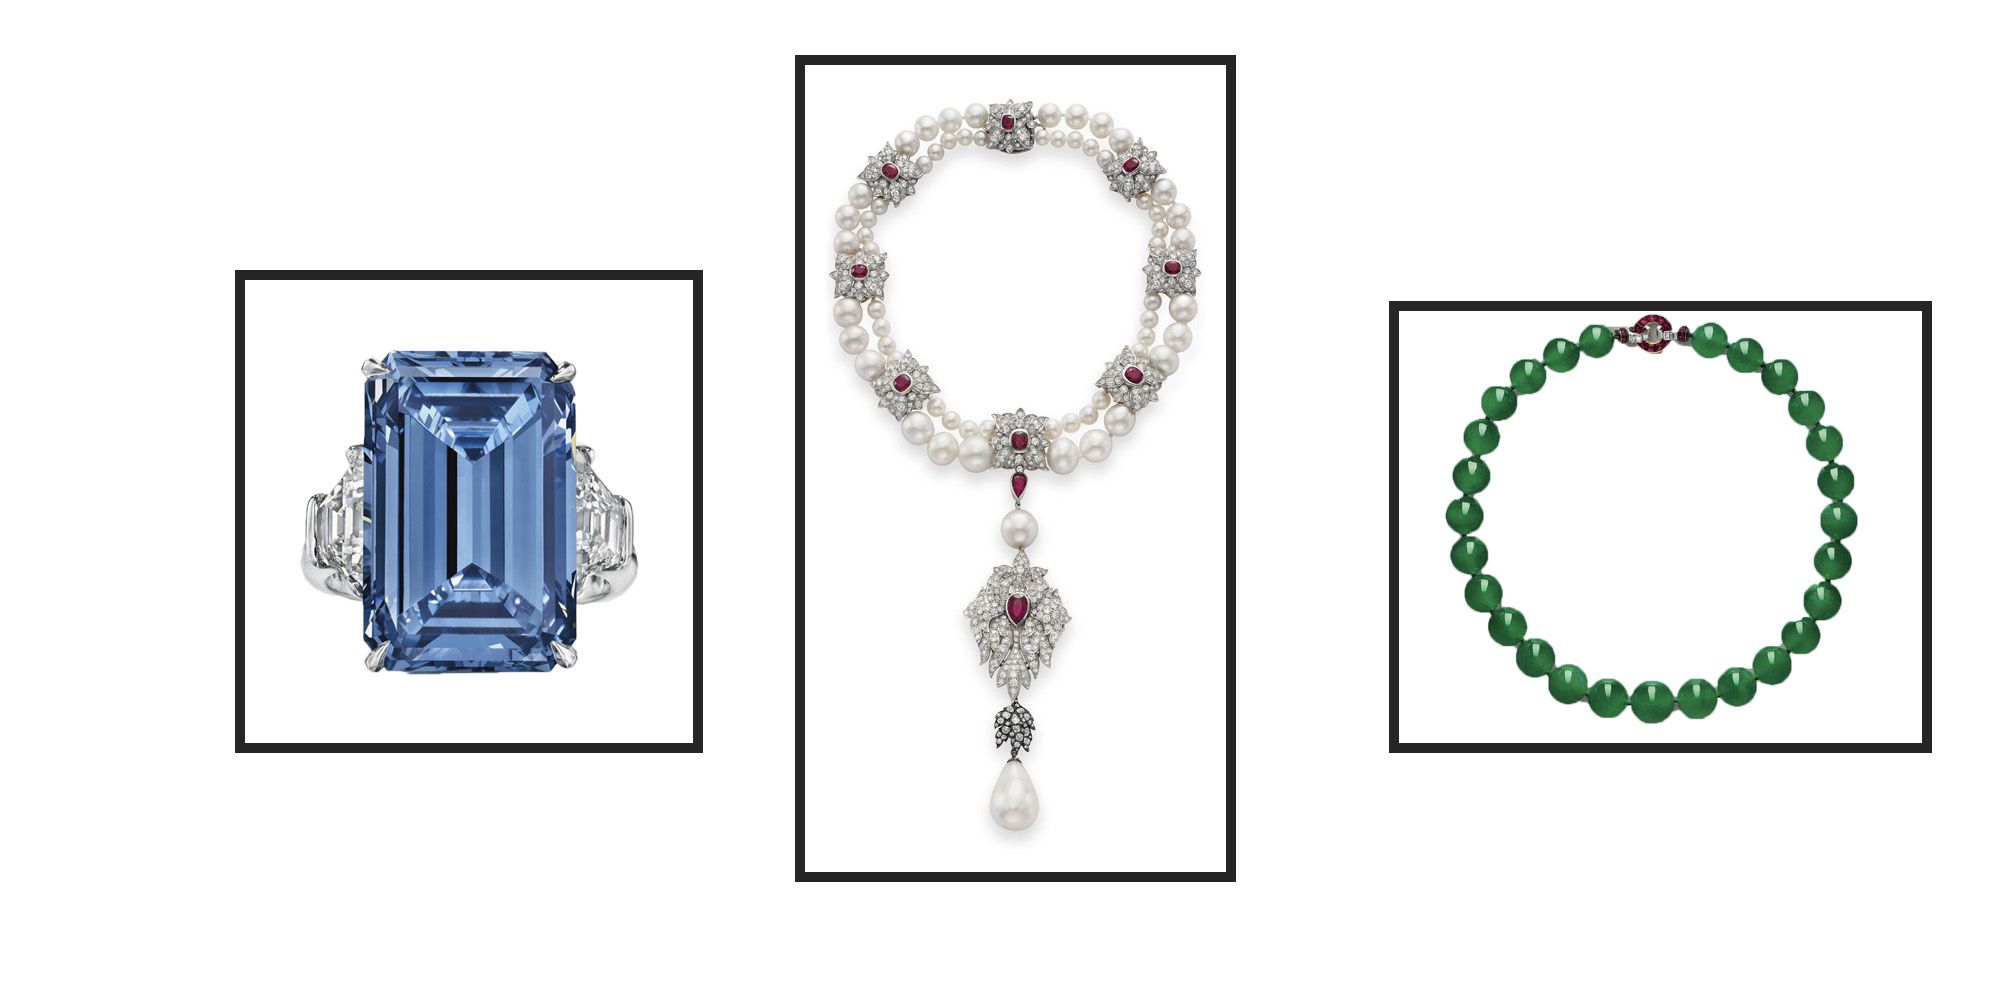 Fine Jewelry: An Important Single-Owner Collection